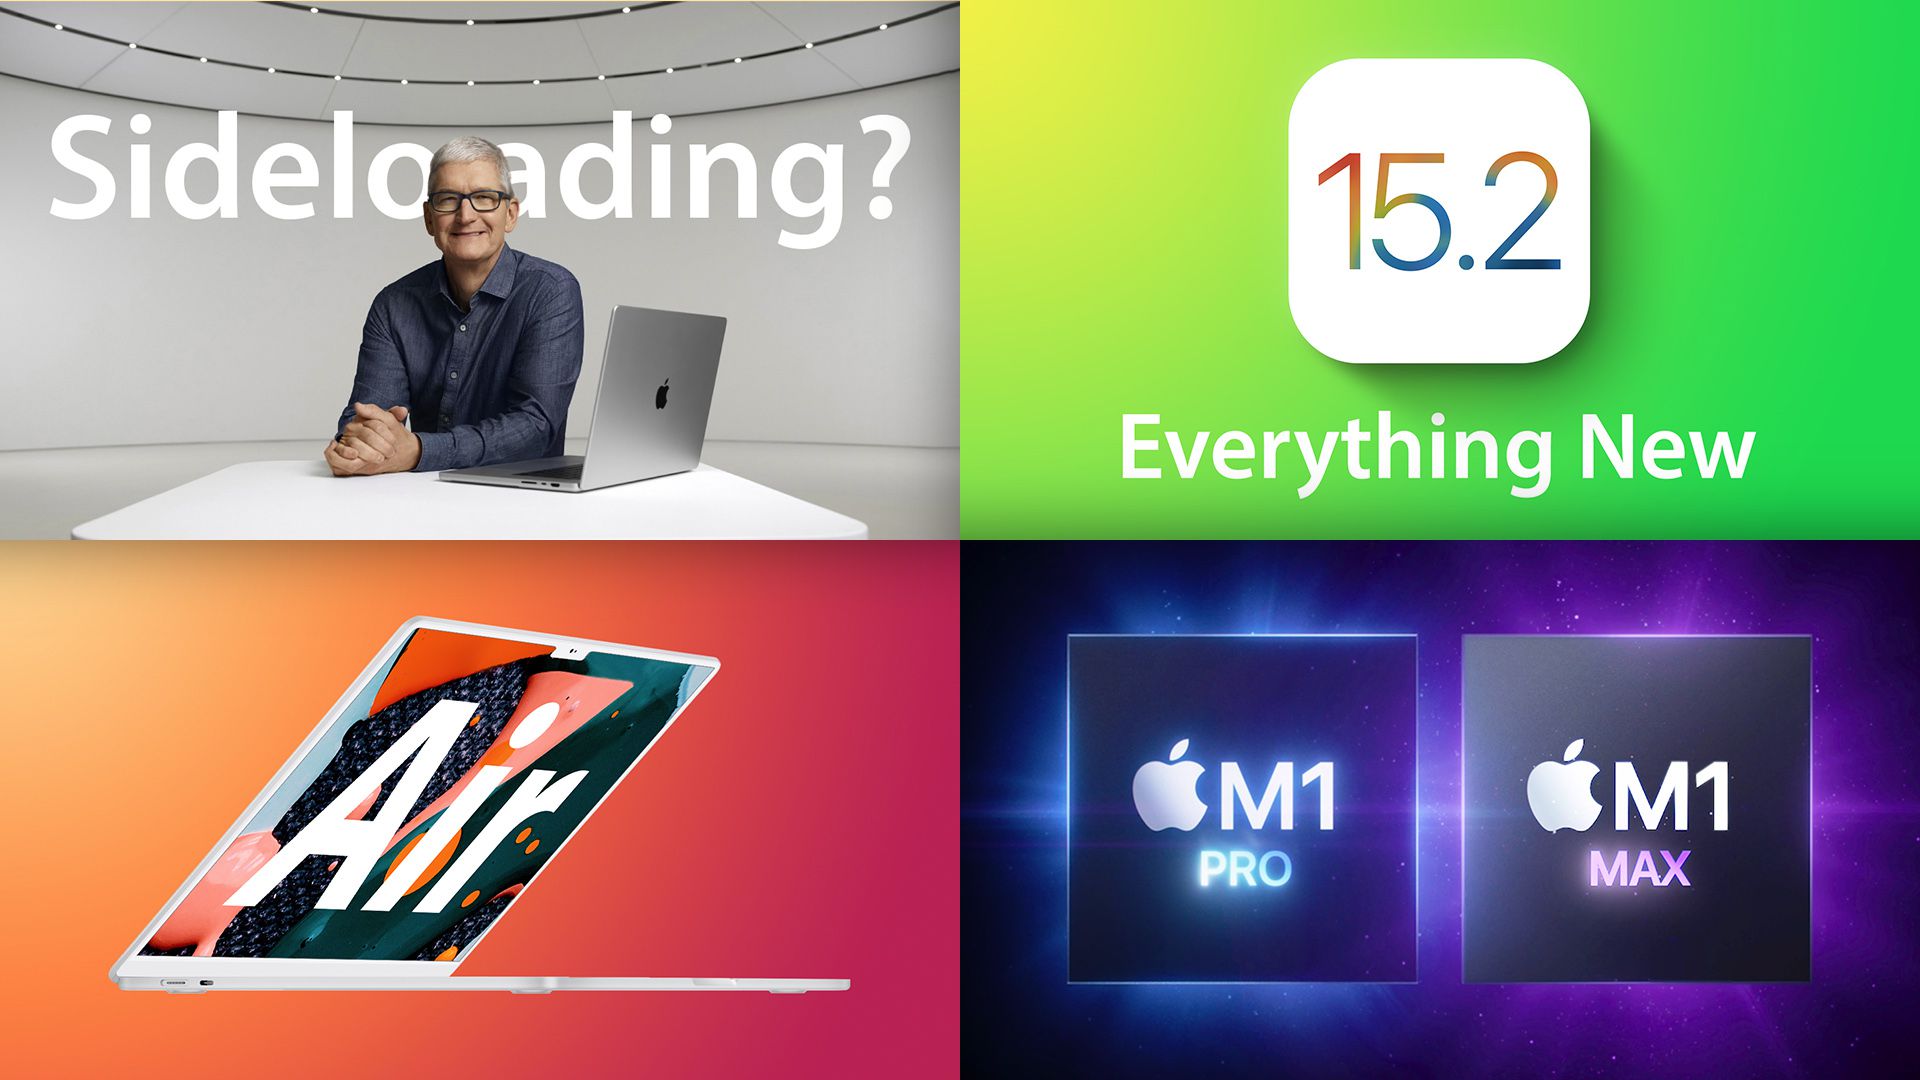 Top Stories: Tim Cook on Sideloading, iOS 15.2 Features, Apple Silicon Roadmap, and More